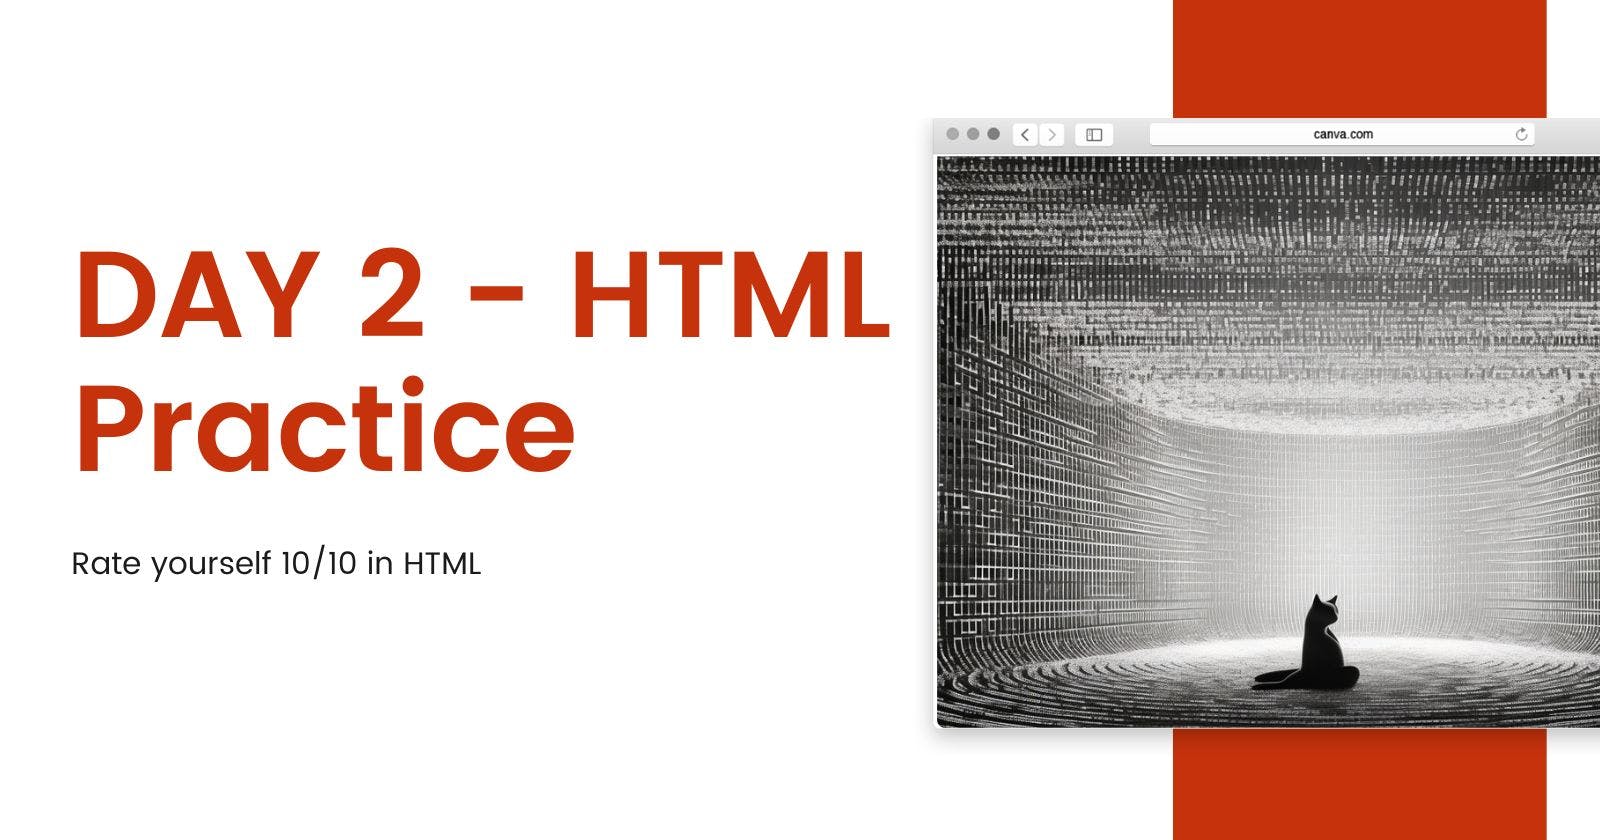 DAY 2 - HTML Practice - Rate yourself 10/10 in HTML